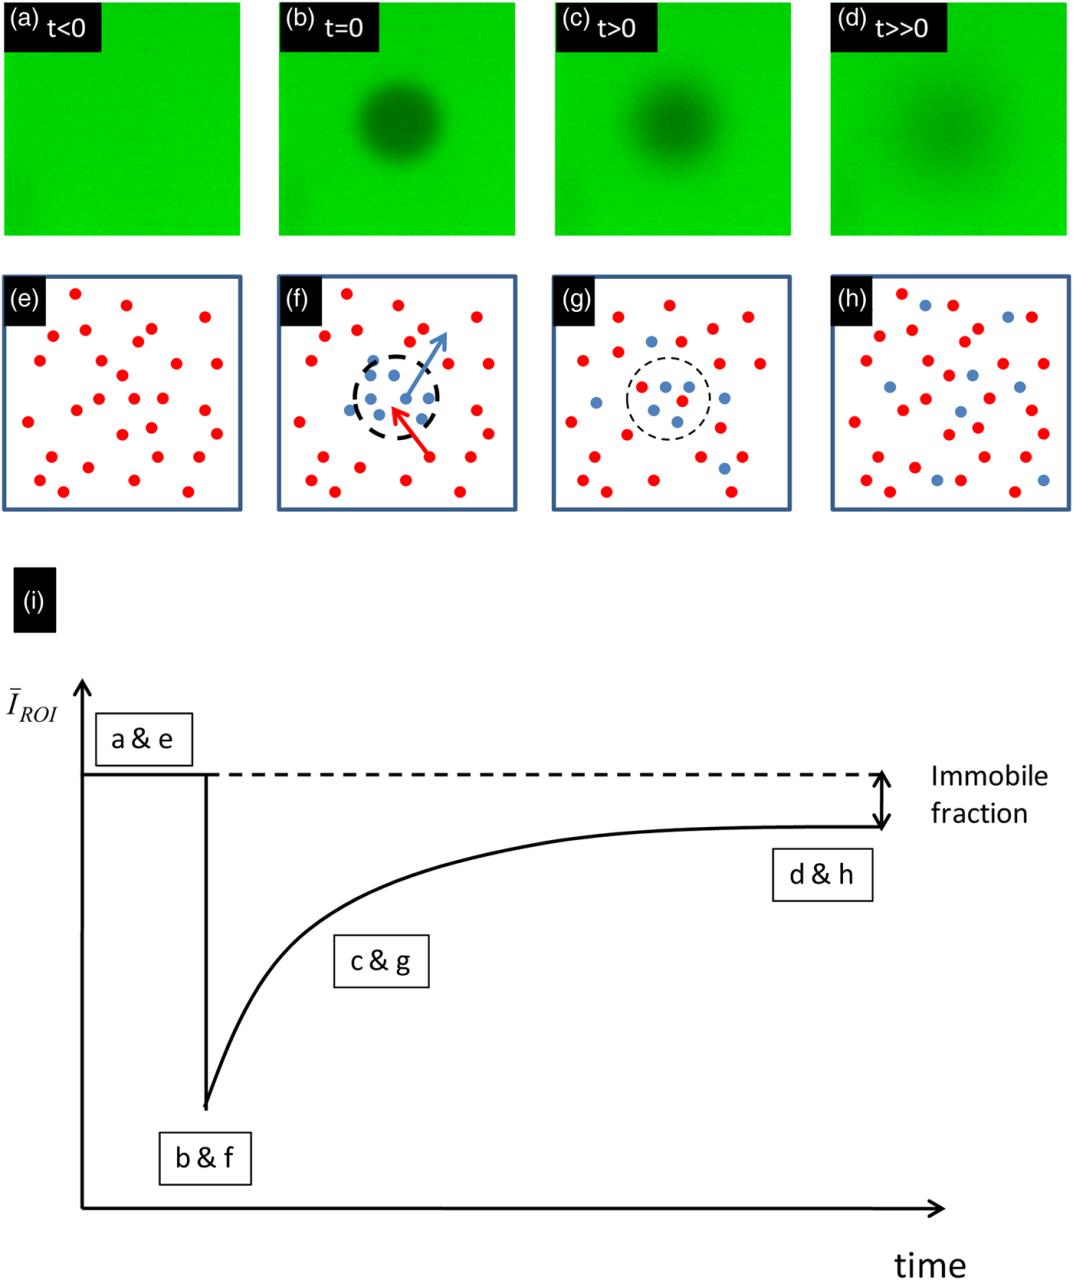 Fluorescence recovery after photobleaching in material and life sciences: putting theory into